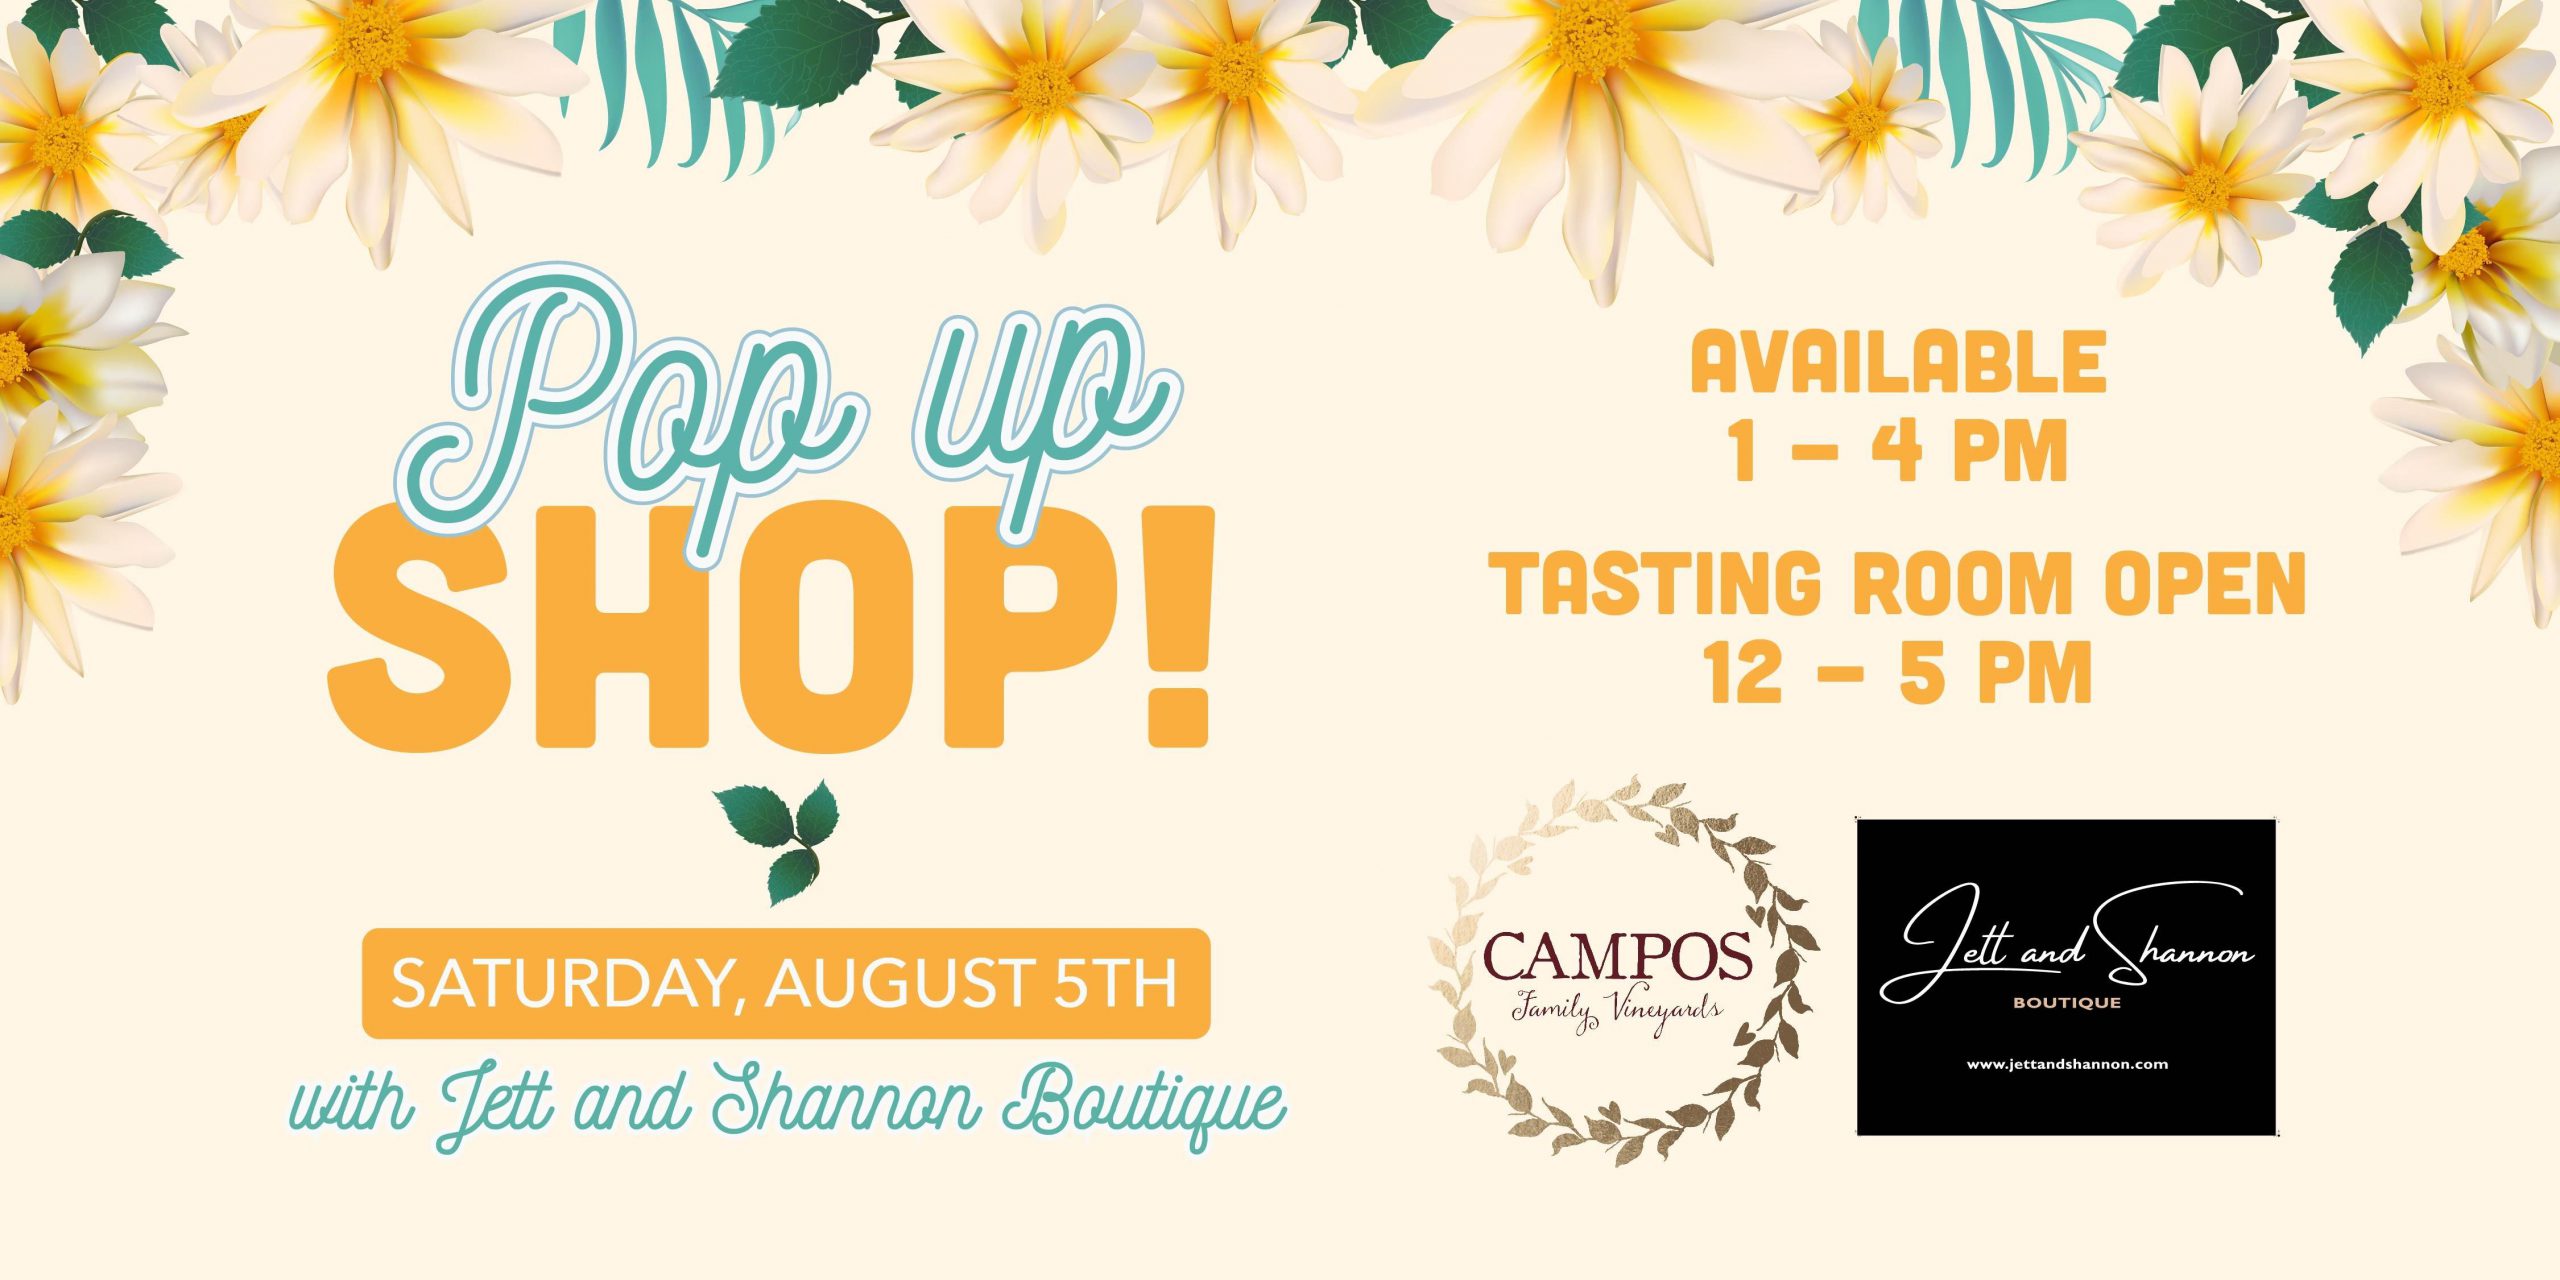 Campos Pop Up Shop with Jett and Shannon Boutique!